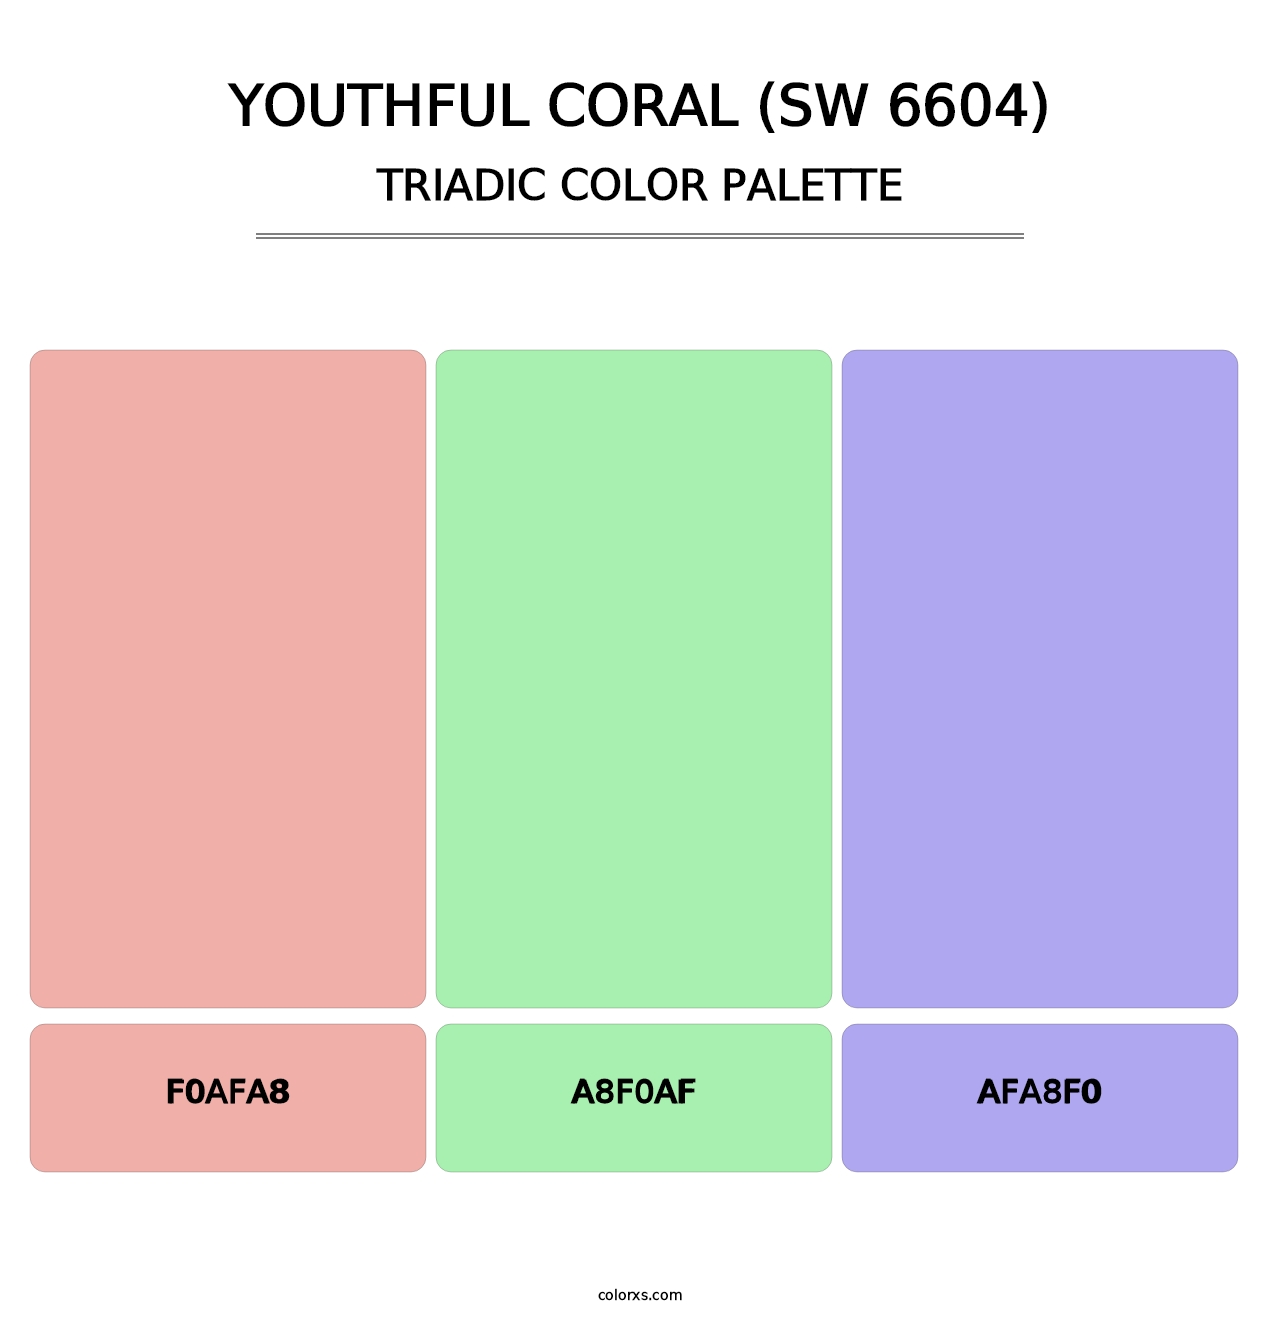 Youthful Coral (SW 6604) - Triadic Color Palette